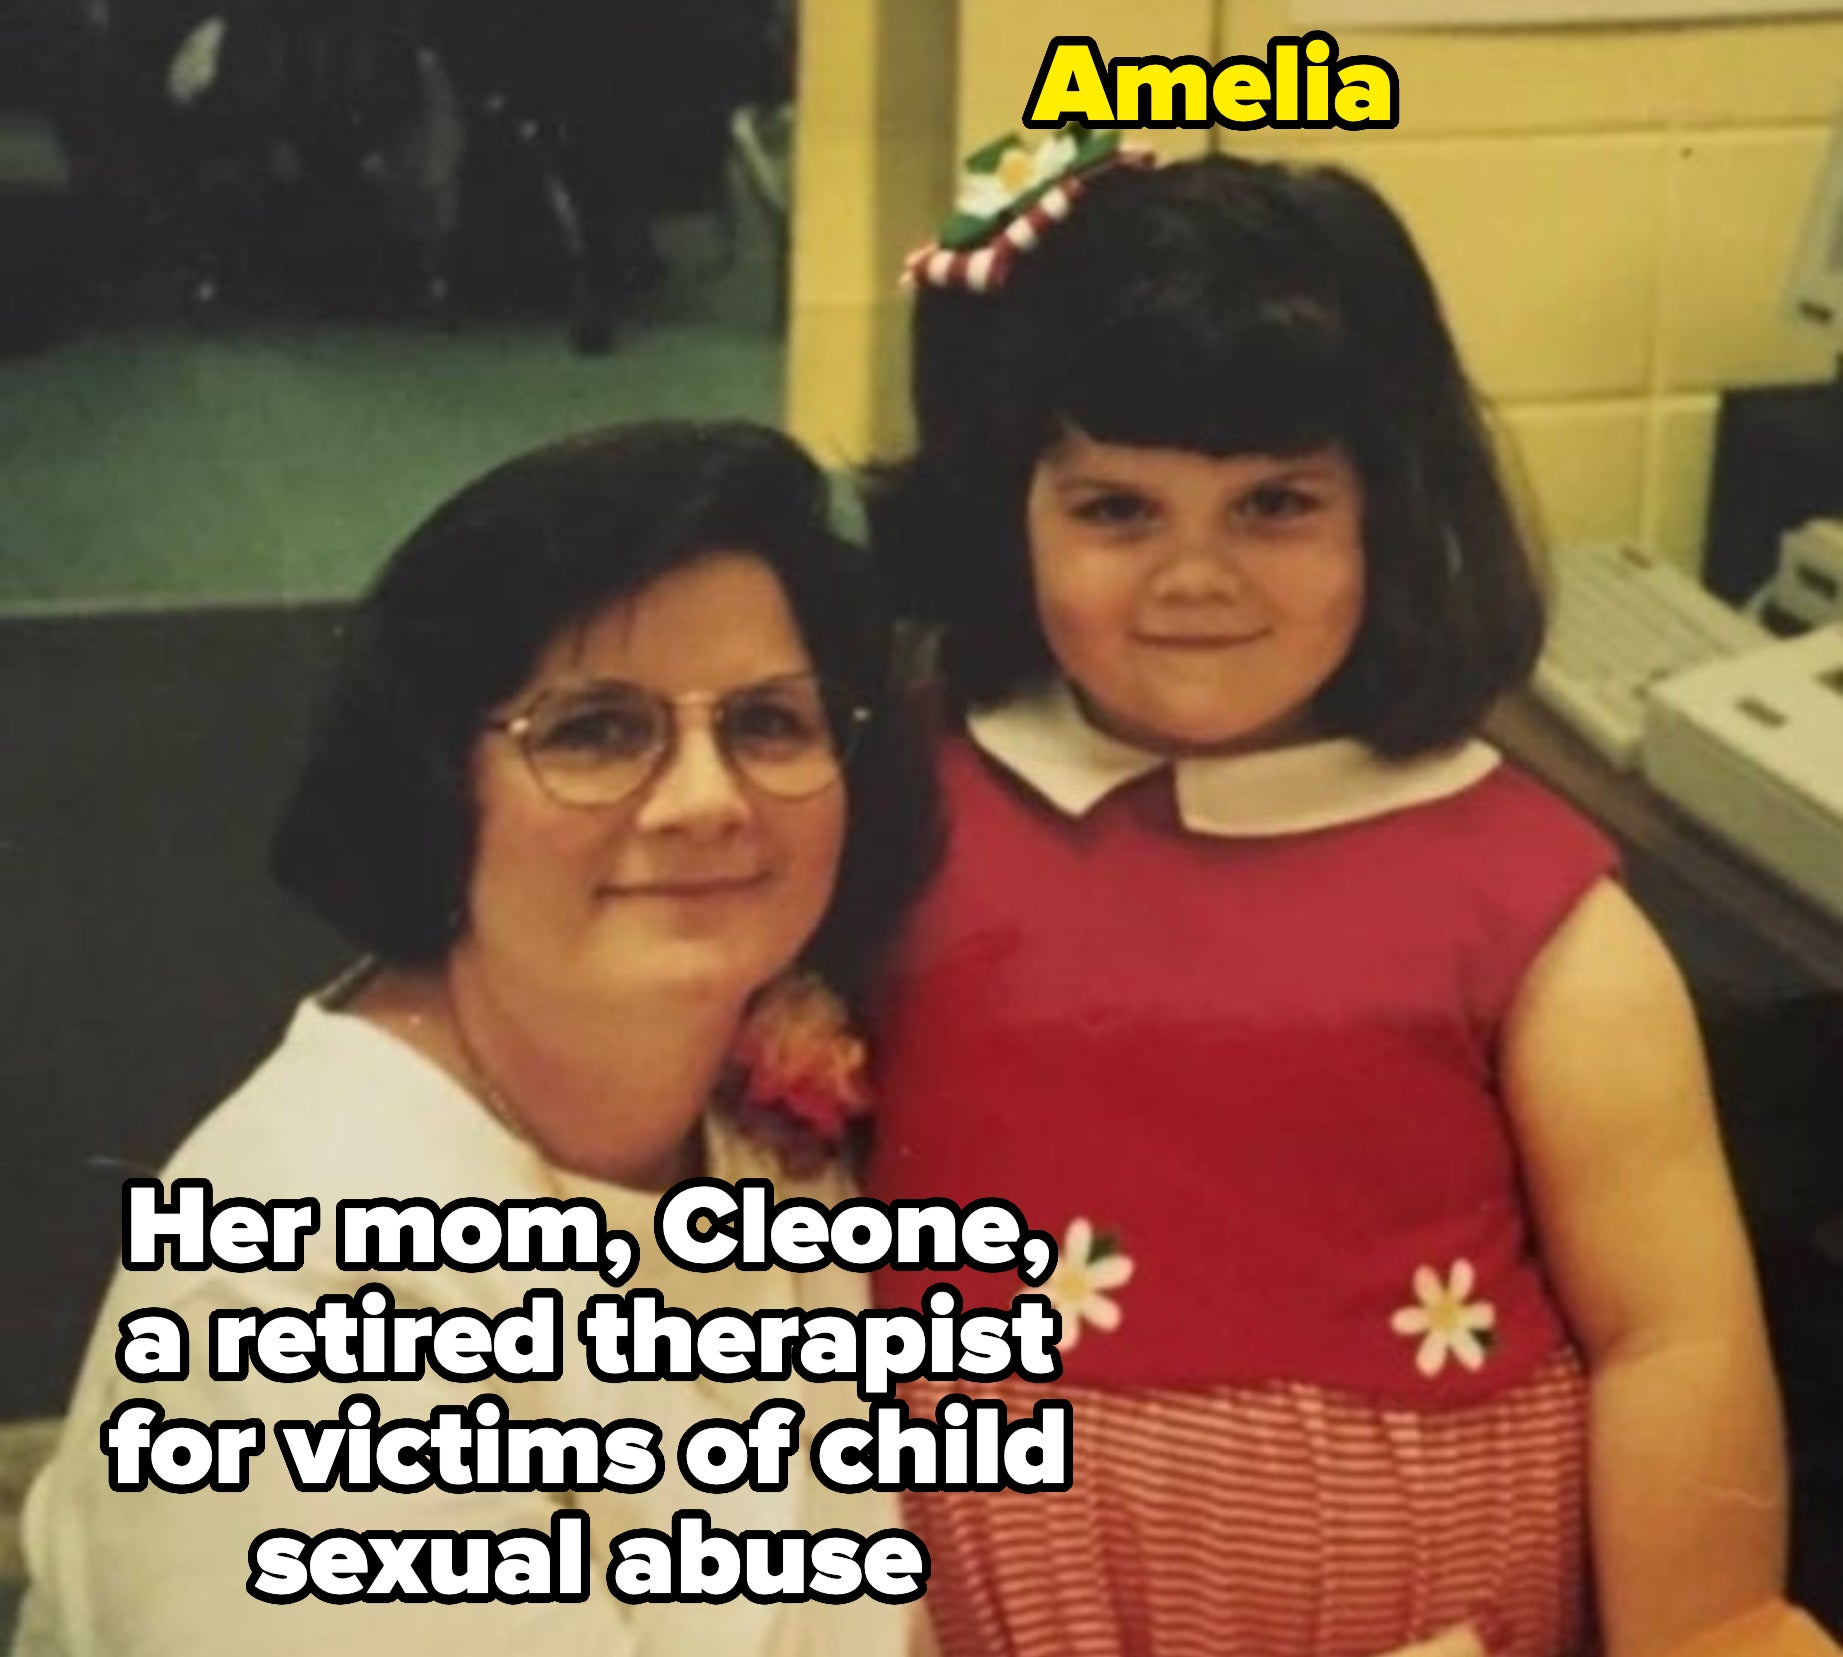 Cleone Brock and her daughter, Amelia